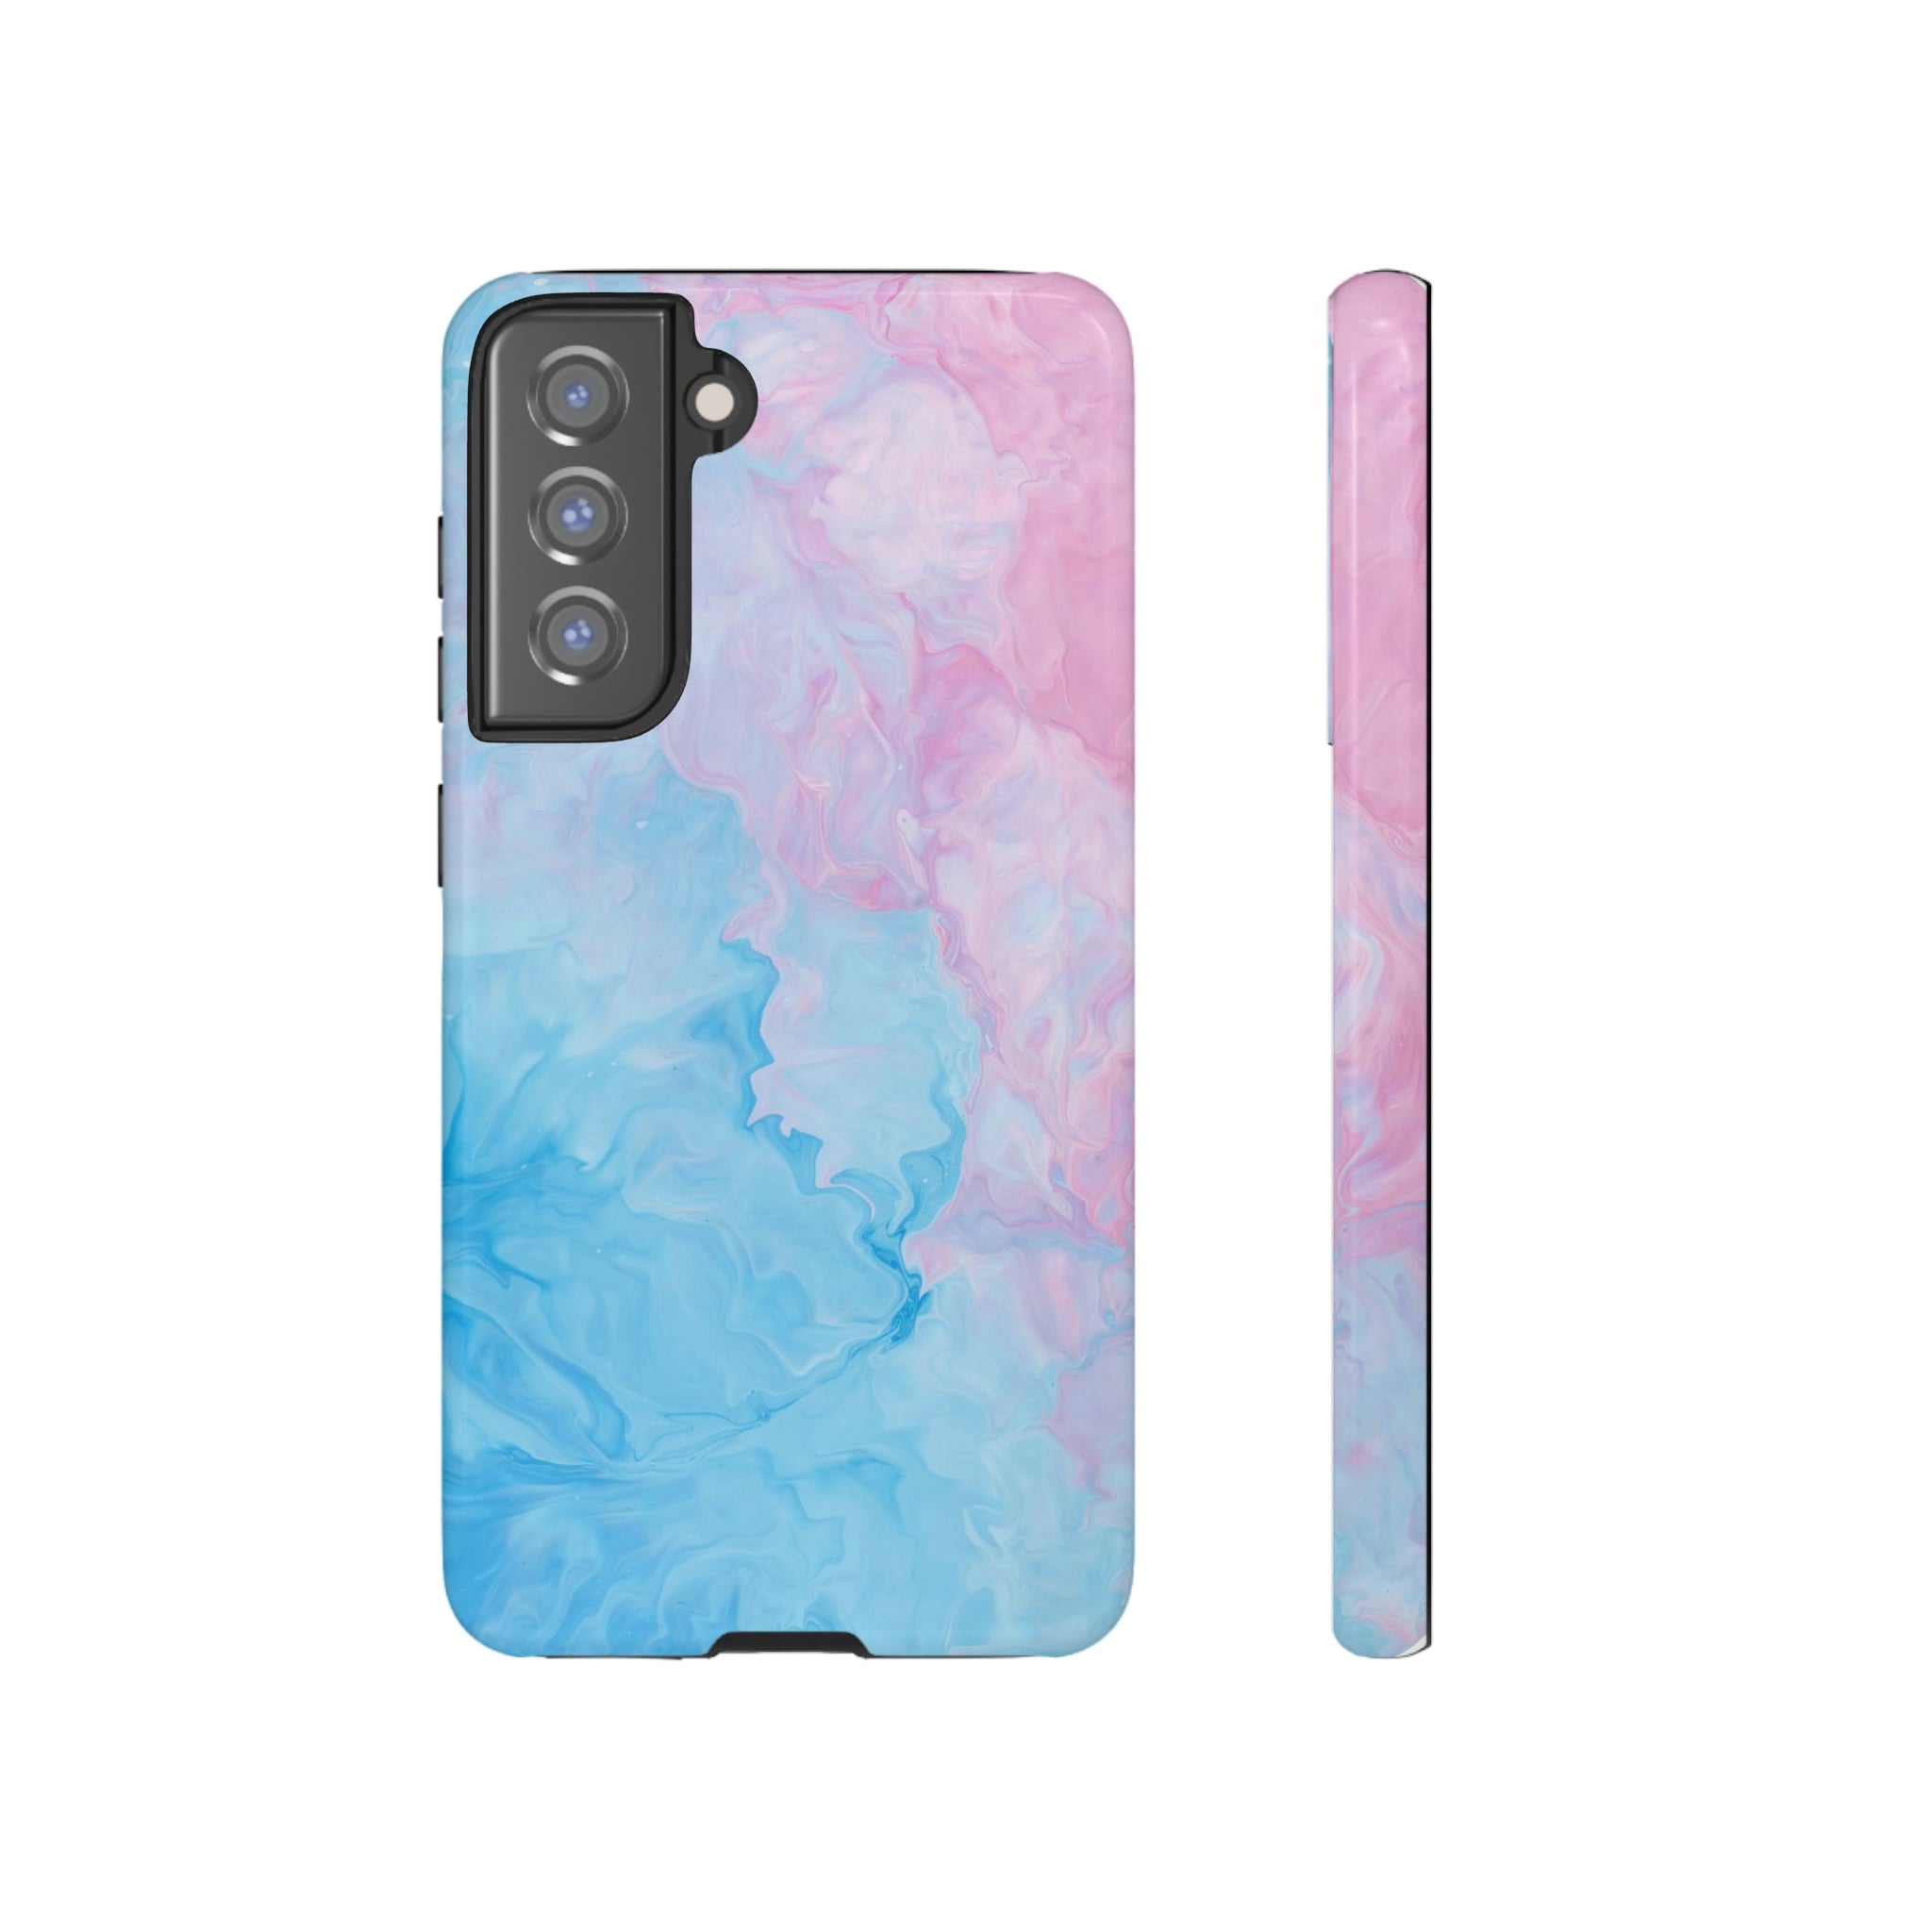 Cotton Candy - Dual Layered, Full Body, Armored Phone Case for iPhone 13/Samsung Galaxy S22/Google Pixel 6